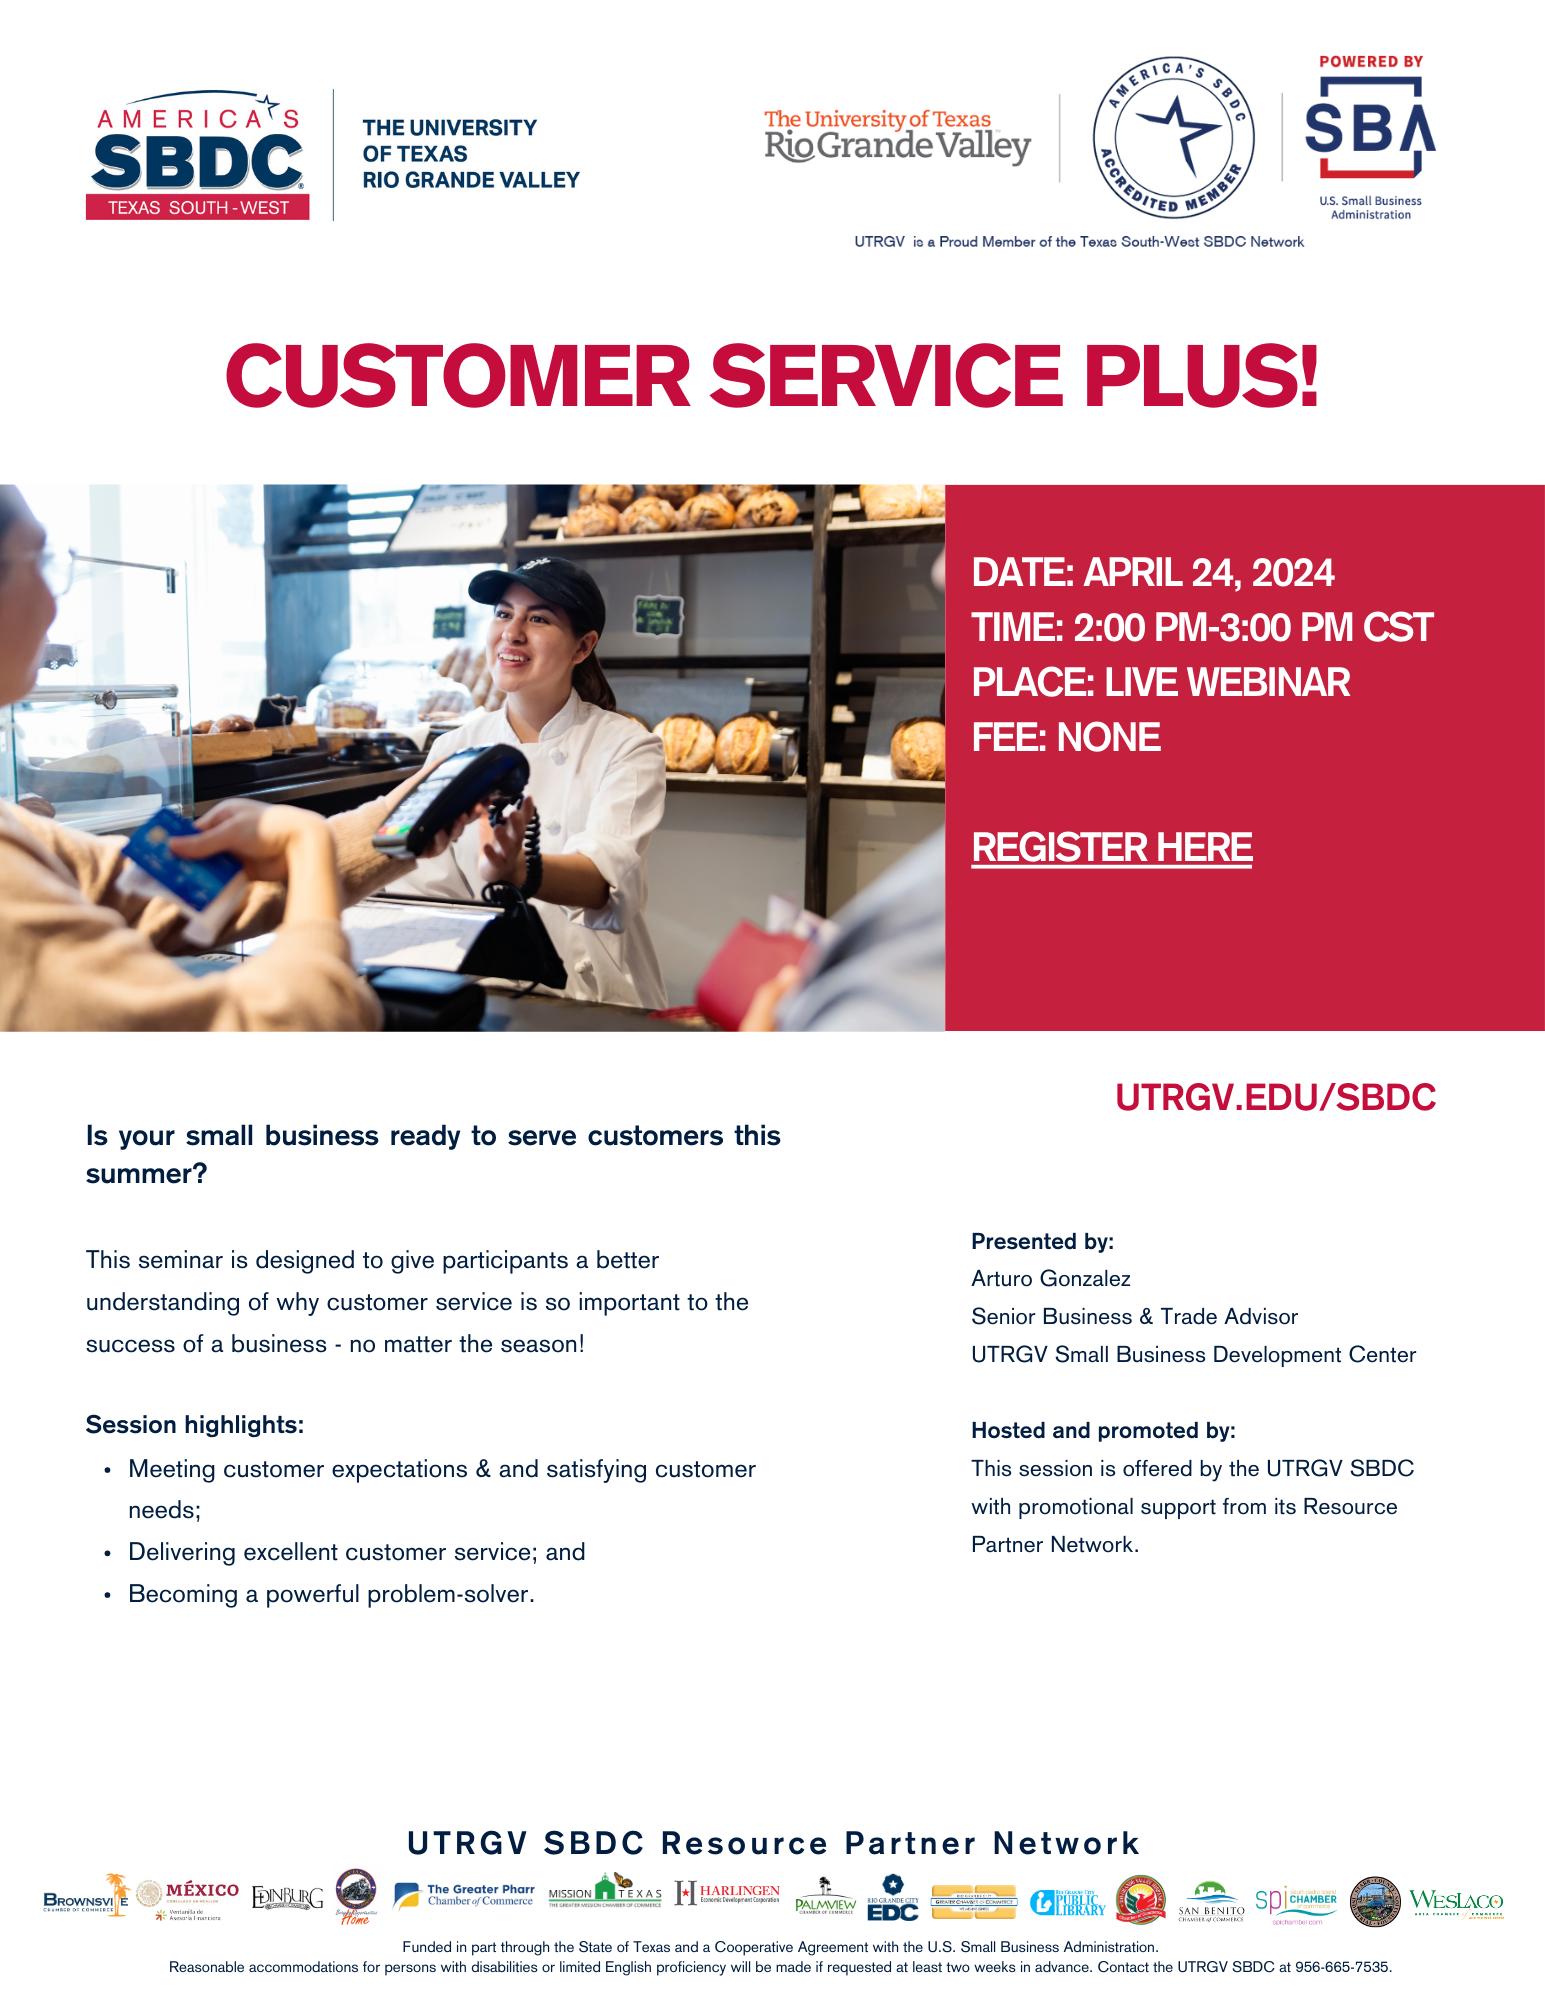 Enhance Your Business’s Customer Service Skills with SBDC Webinar